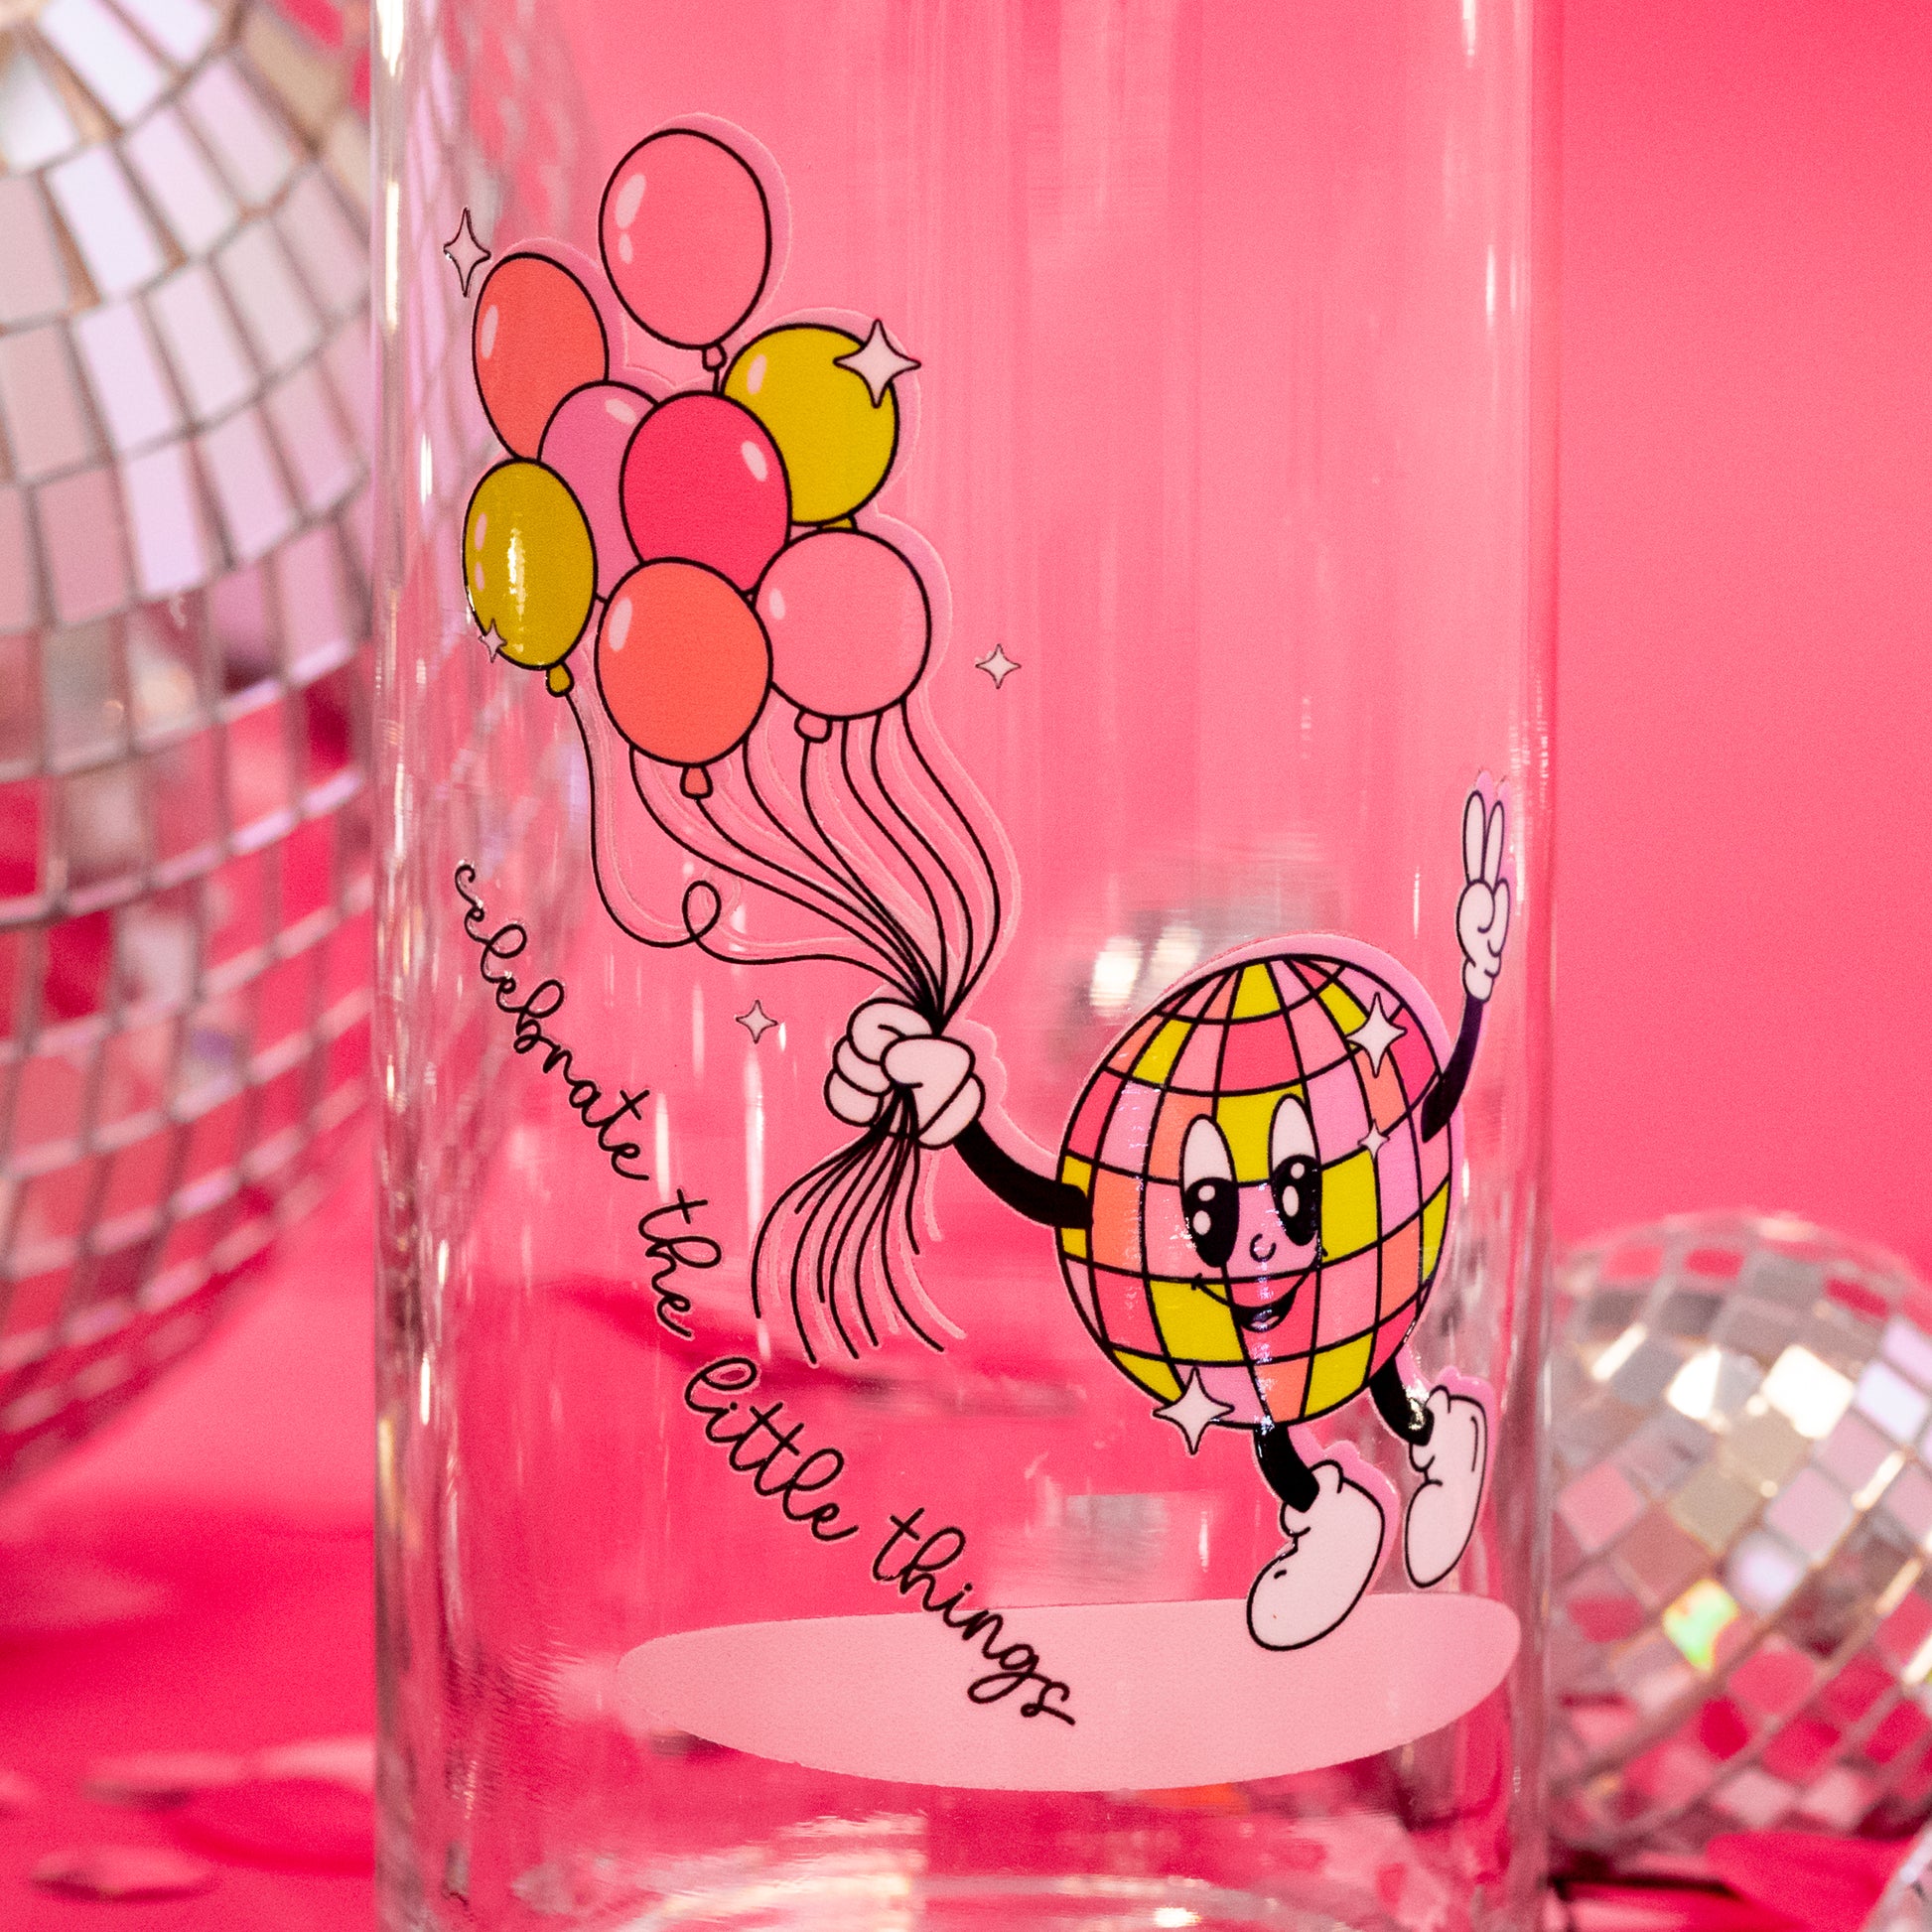 beer can glass with pink, yellow, and orange deisgn